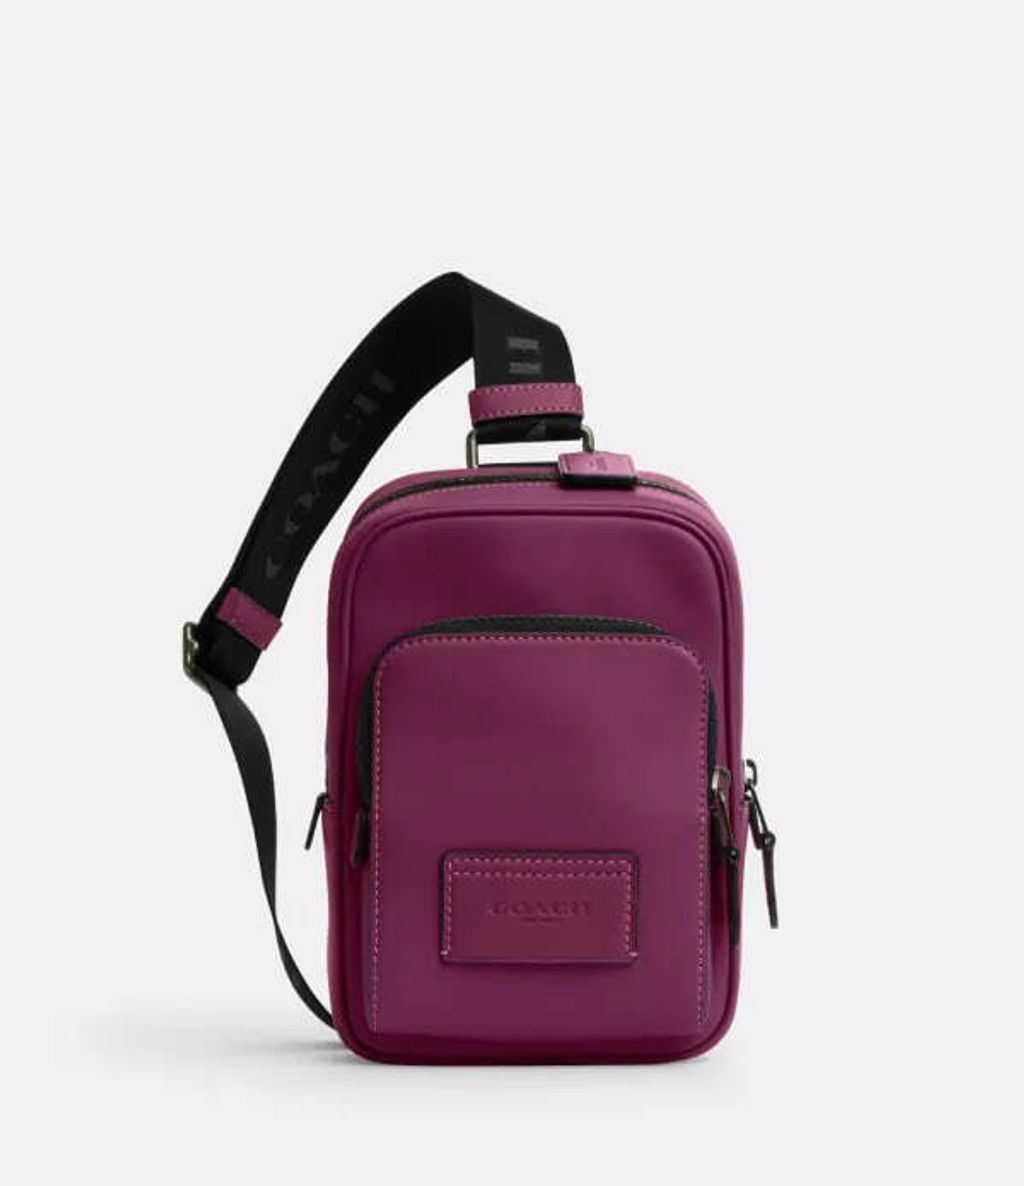 handbagbranded.com getlush outlet personalshopper usa Coach malaysia ready stock Coach Track Pack 14 in Deep Berry